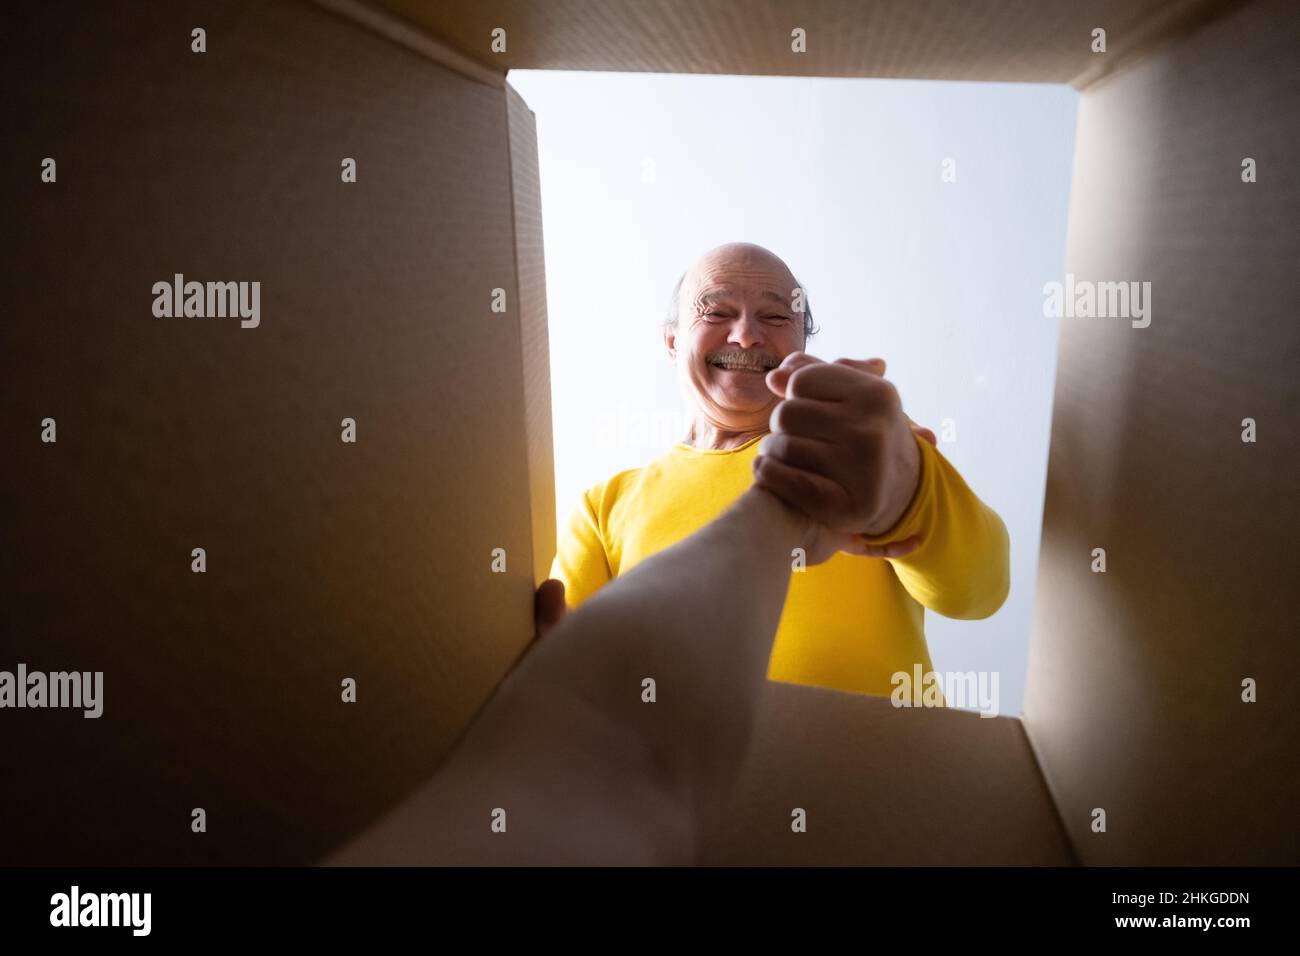 Senior manhelping somebody to get out from box. Help in strange situation. Stock Photo